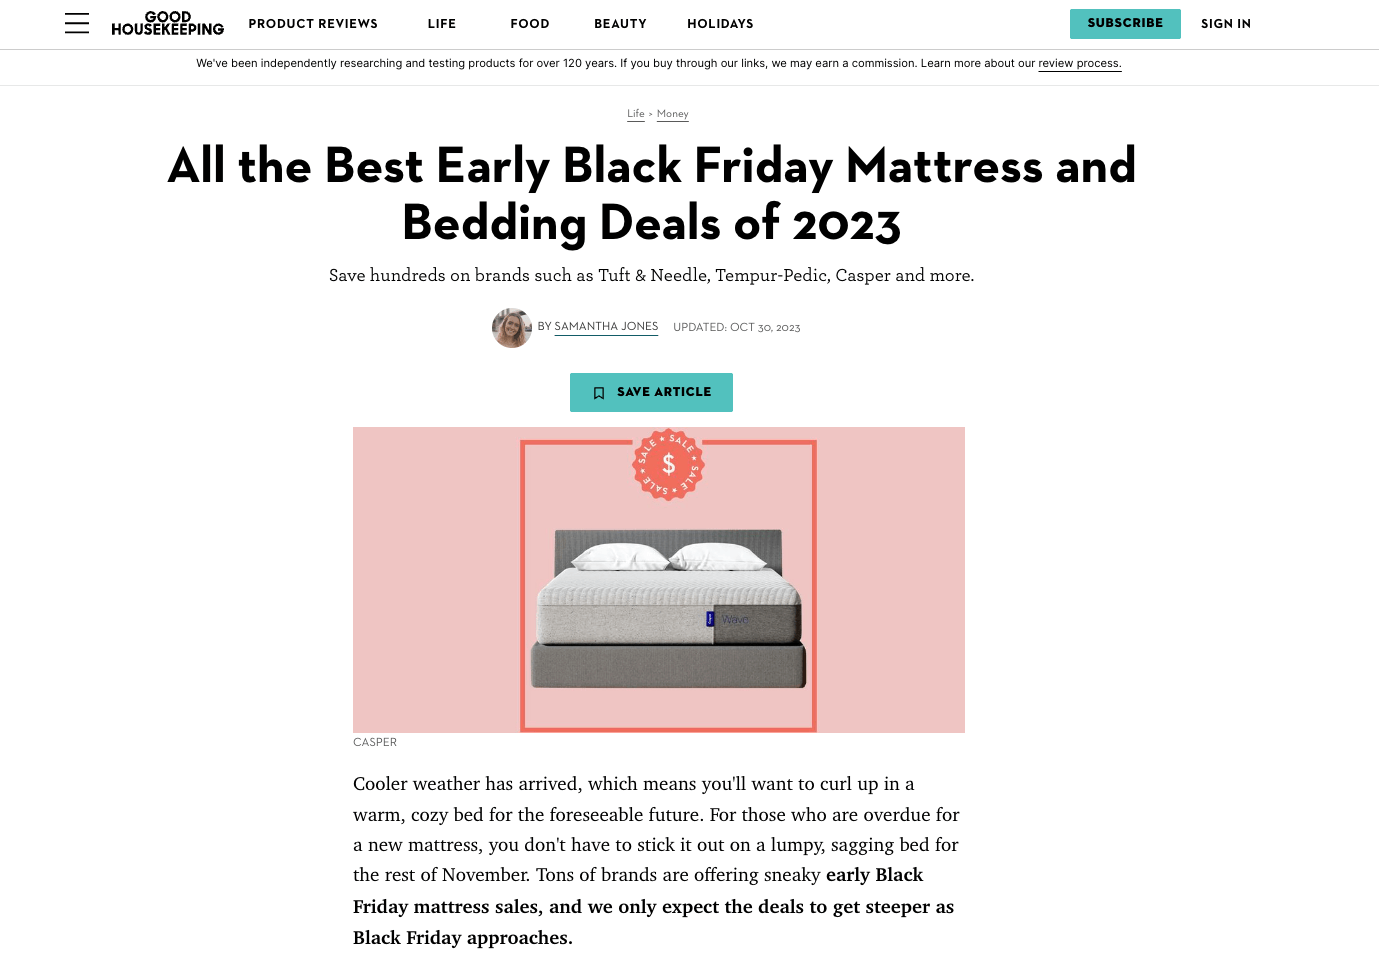 9 Genius Ideas to Steal for Your Black Friday Marketing Campaigns